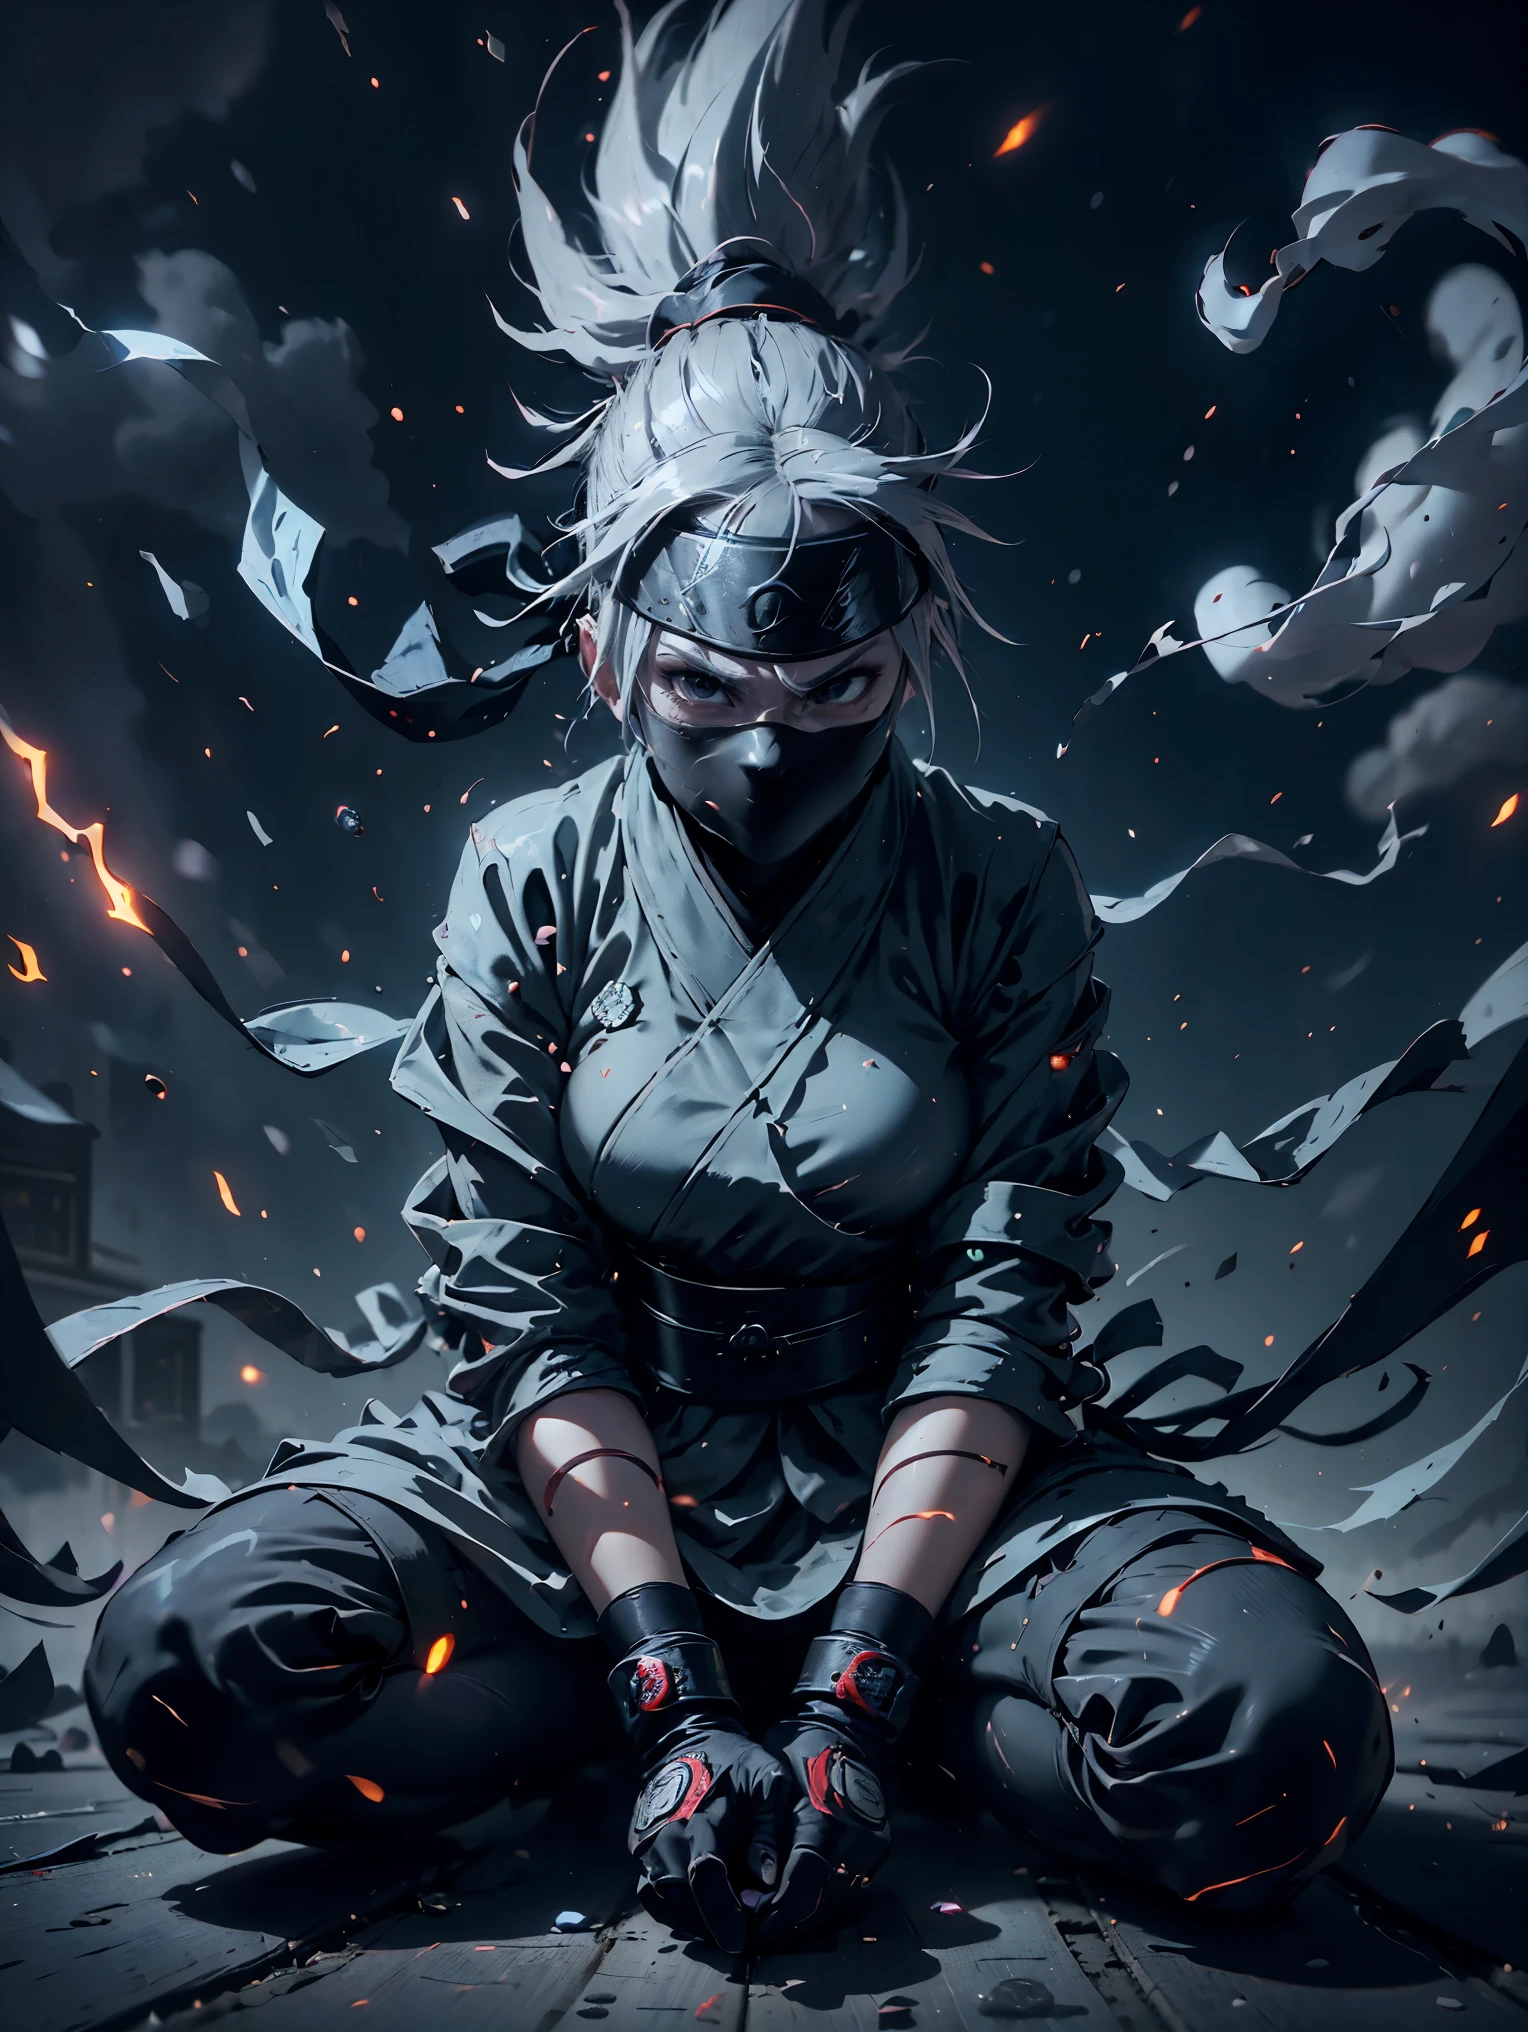 One Girl, Silver-haired kunoichi, (highest quality,16K,High resolution),Sit on the ground in street style, Red ninja gloves, Gray Hair, ninja headband, Mask covering the mouth, Graffiti Background, Vibrant colors, urban art style, Edgy lighting,((Ghostly Ninja)), lightning, Holding a fierce thunder light